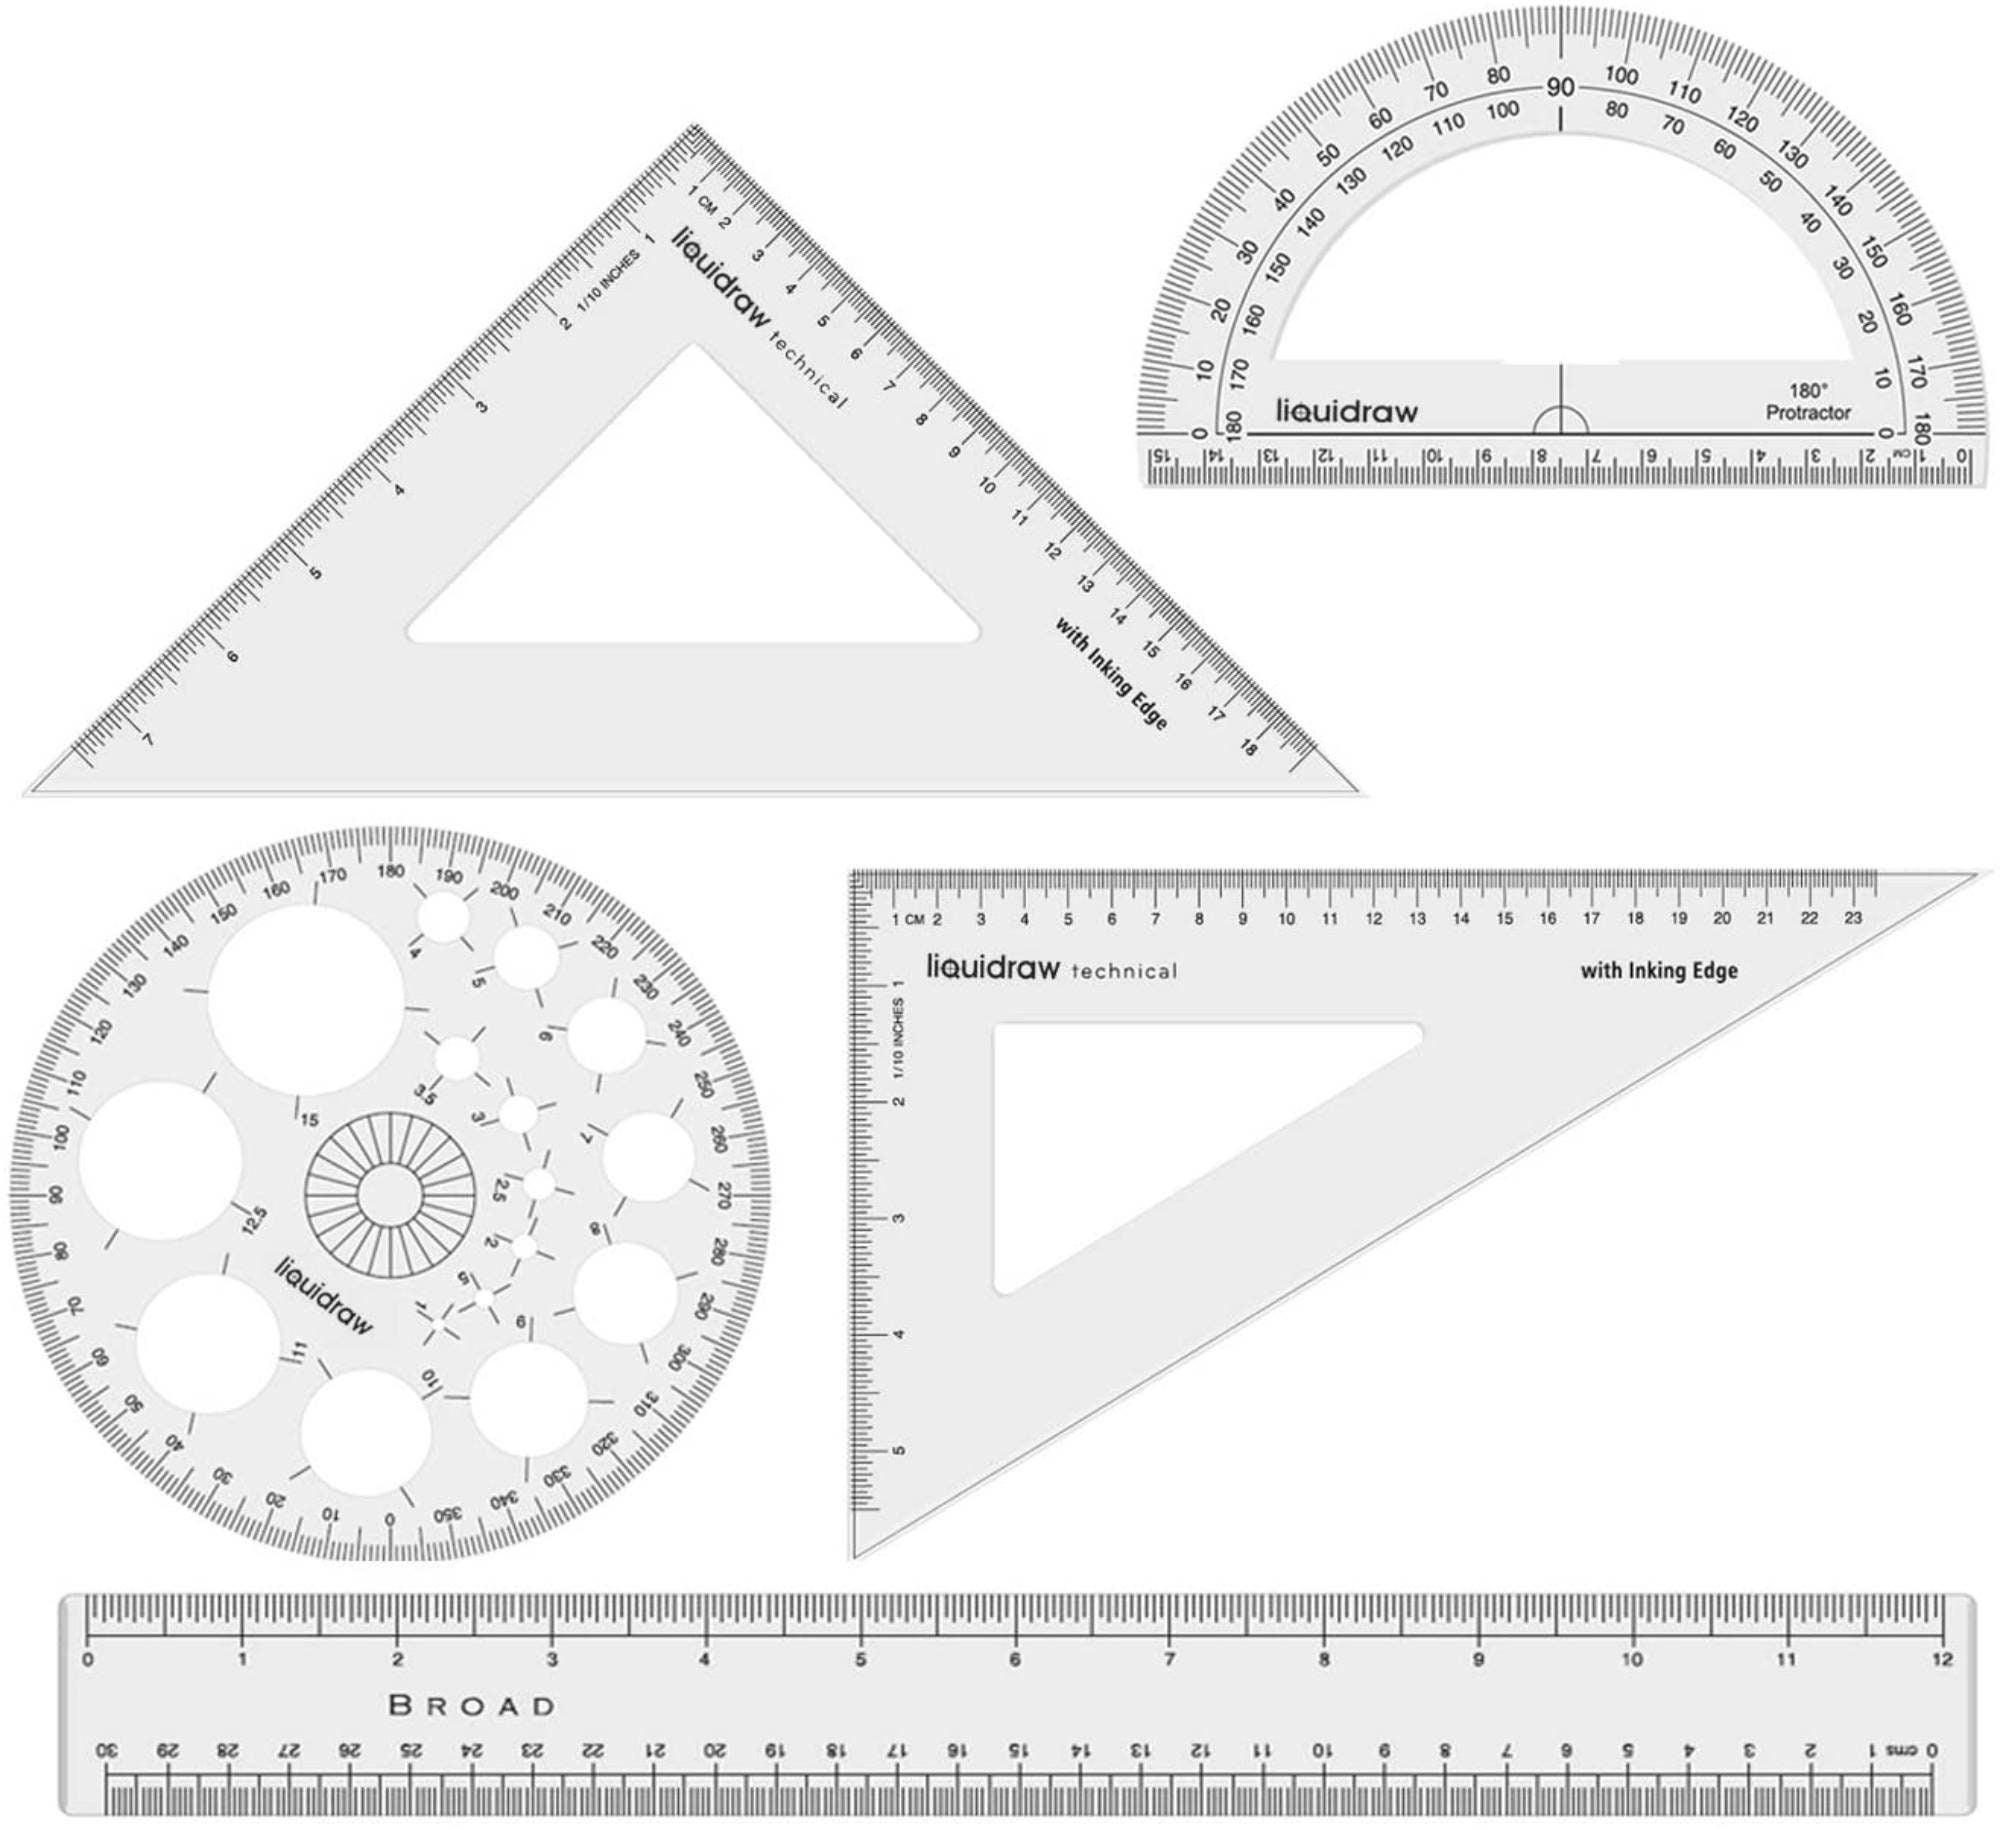 Circle Template For Drawing 17 Pieces Geometric Art Design Measuring Ruler  Transparent Painting Design Supplies With Clear Scale